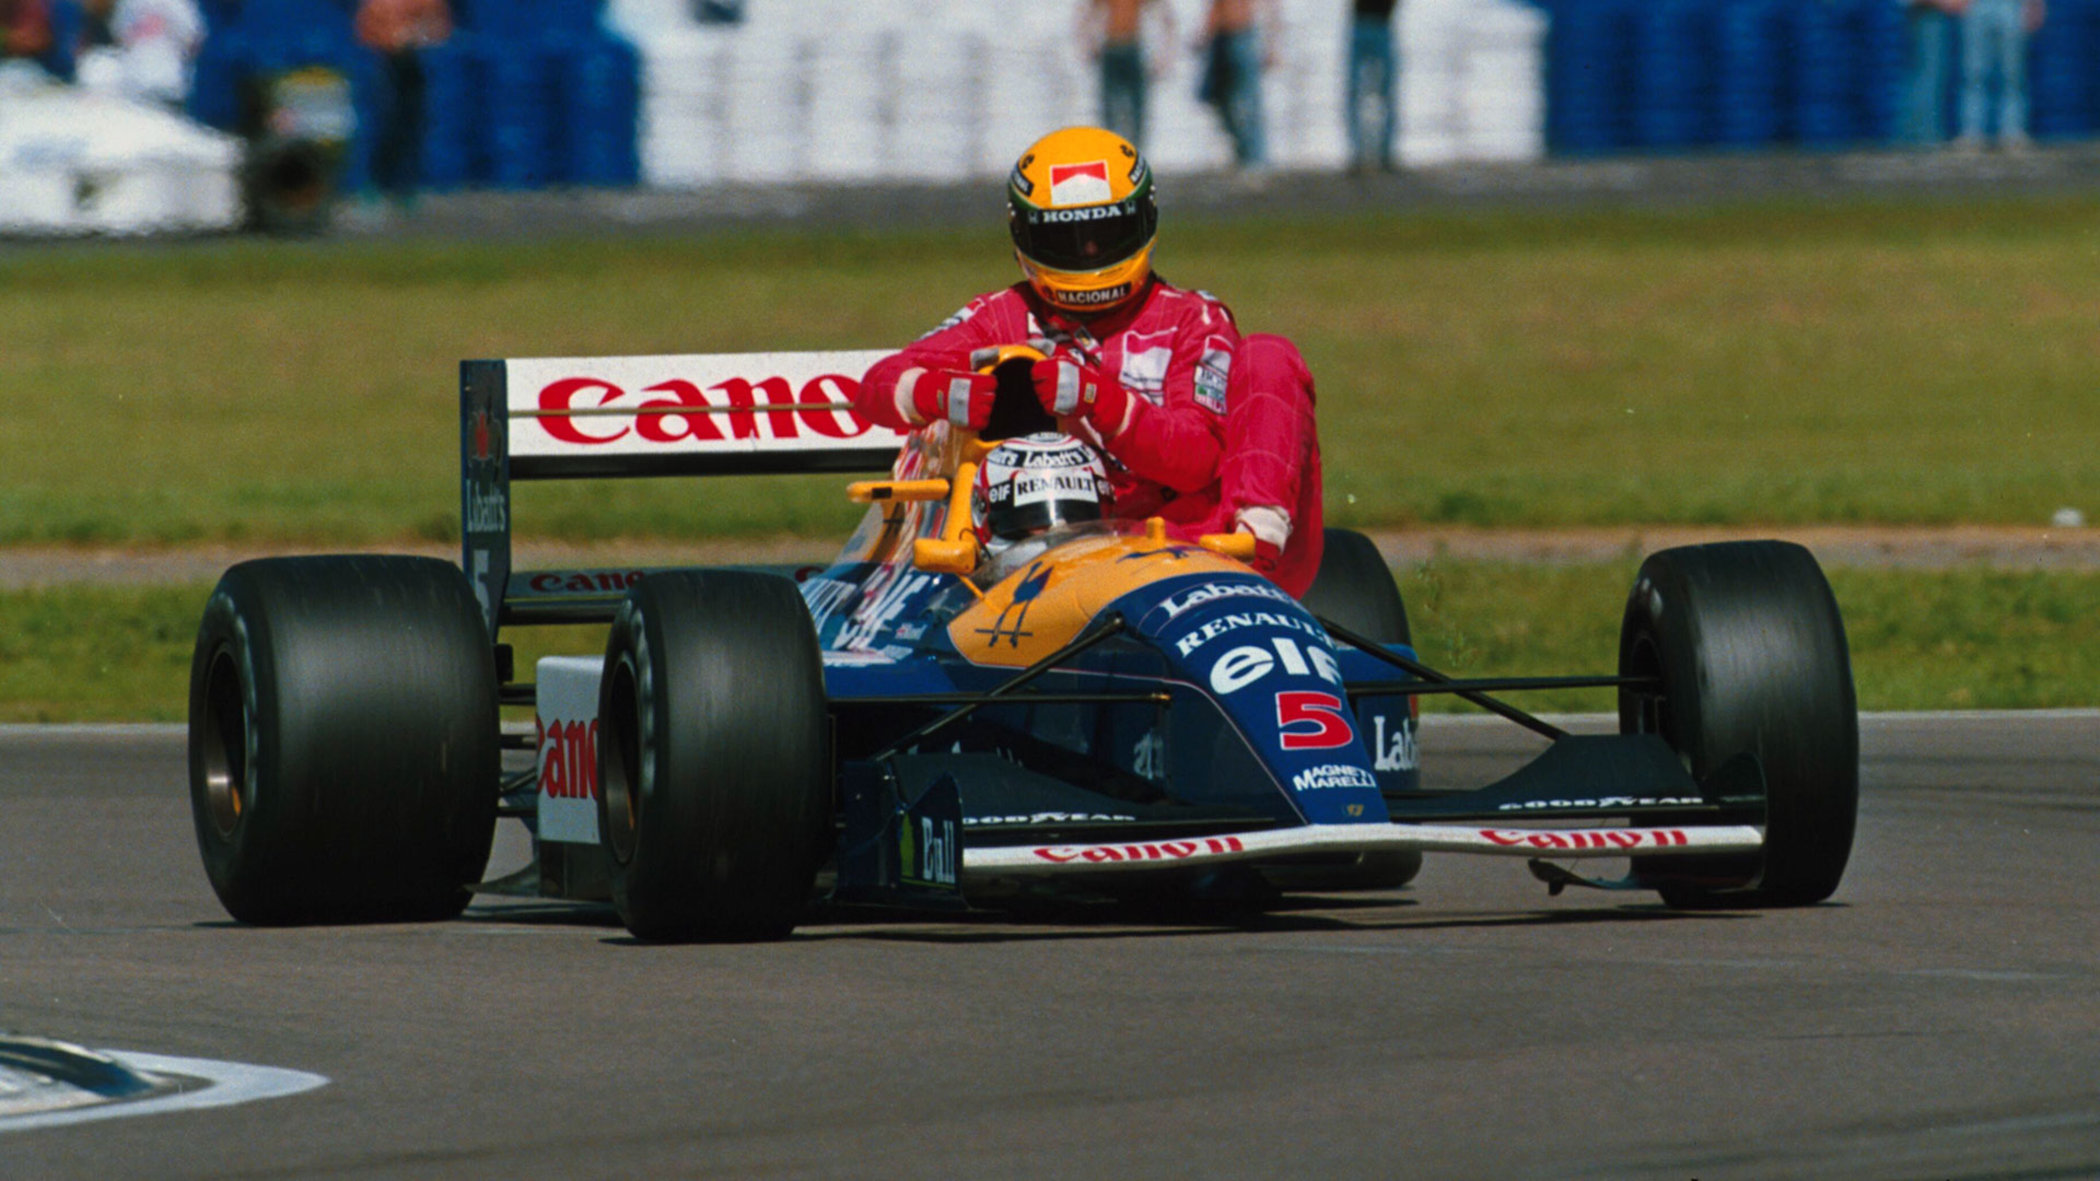 Silverstone Grand Prix 1991 - Nigel Mansell gives Ayrton Senna a lift after running out of fuel